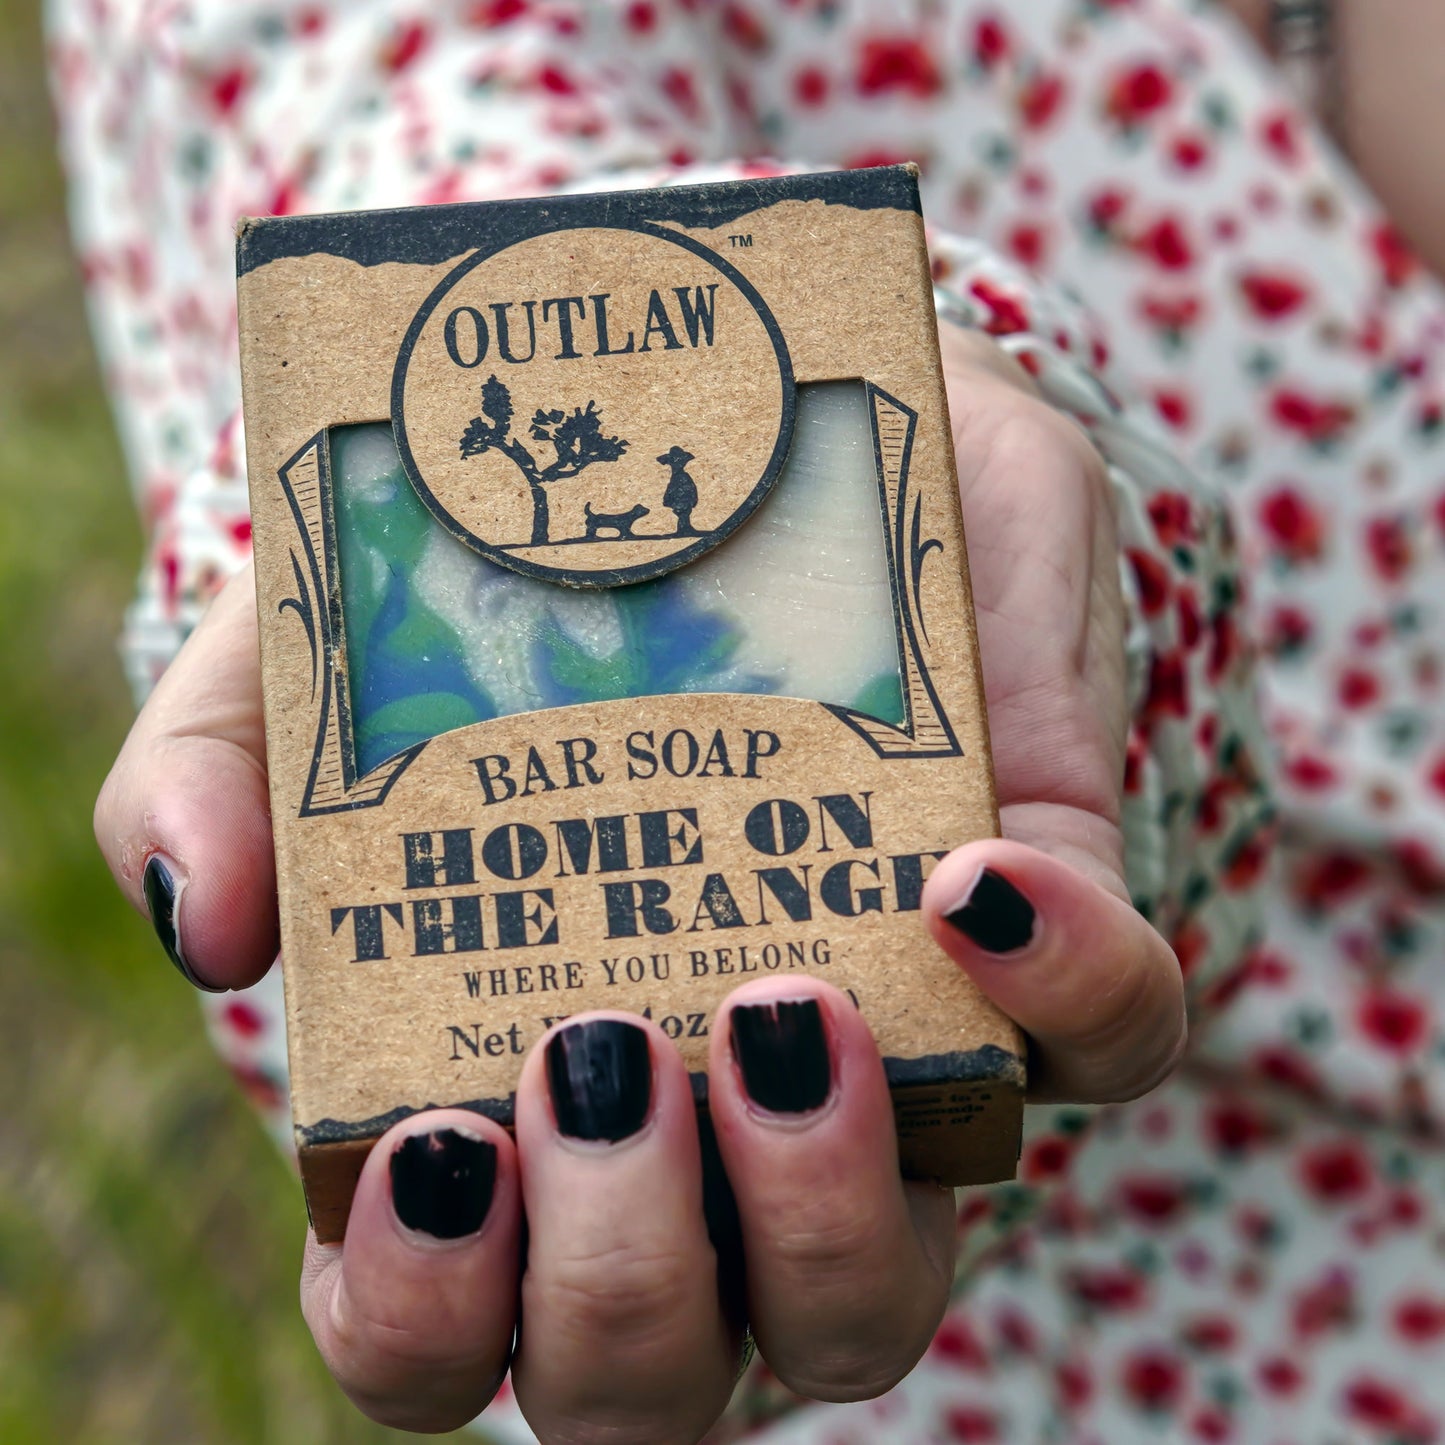 Outlaw Home On The Range Bar Soap